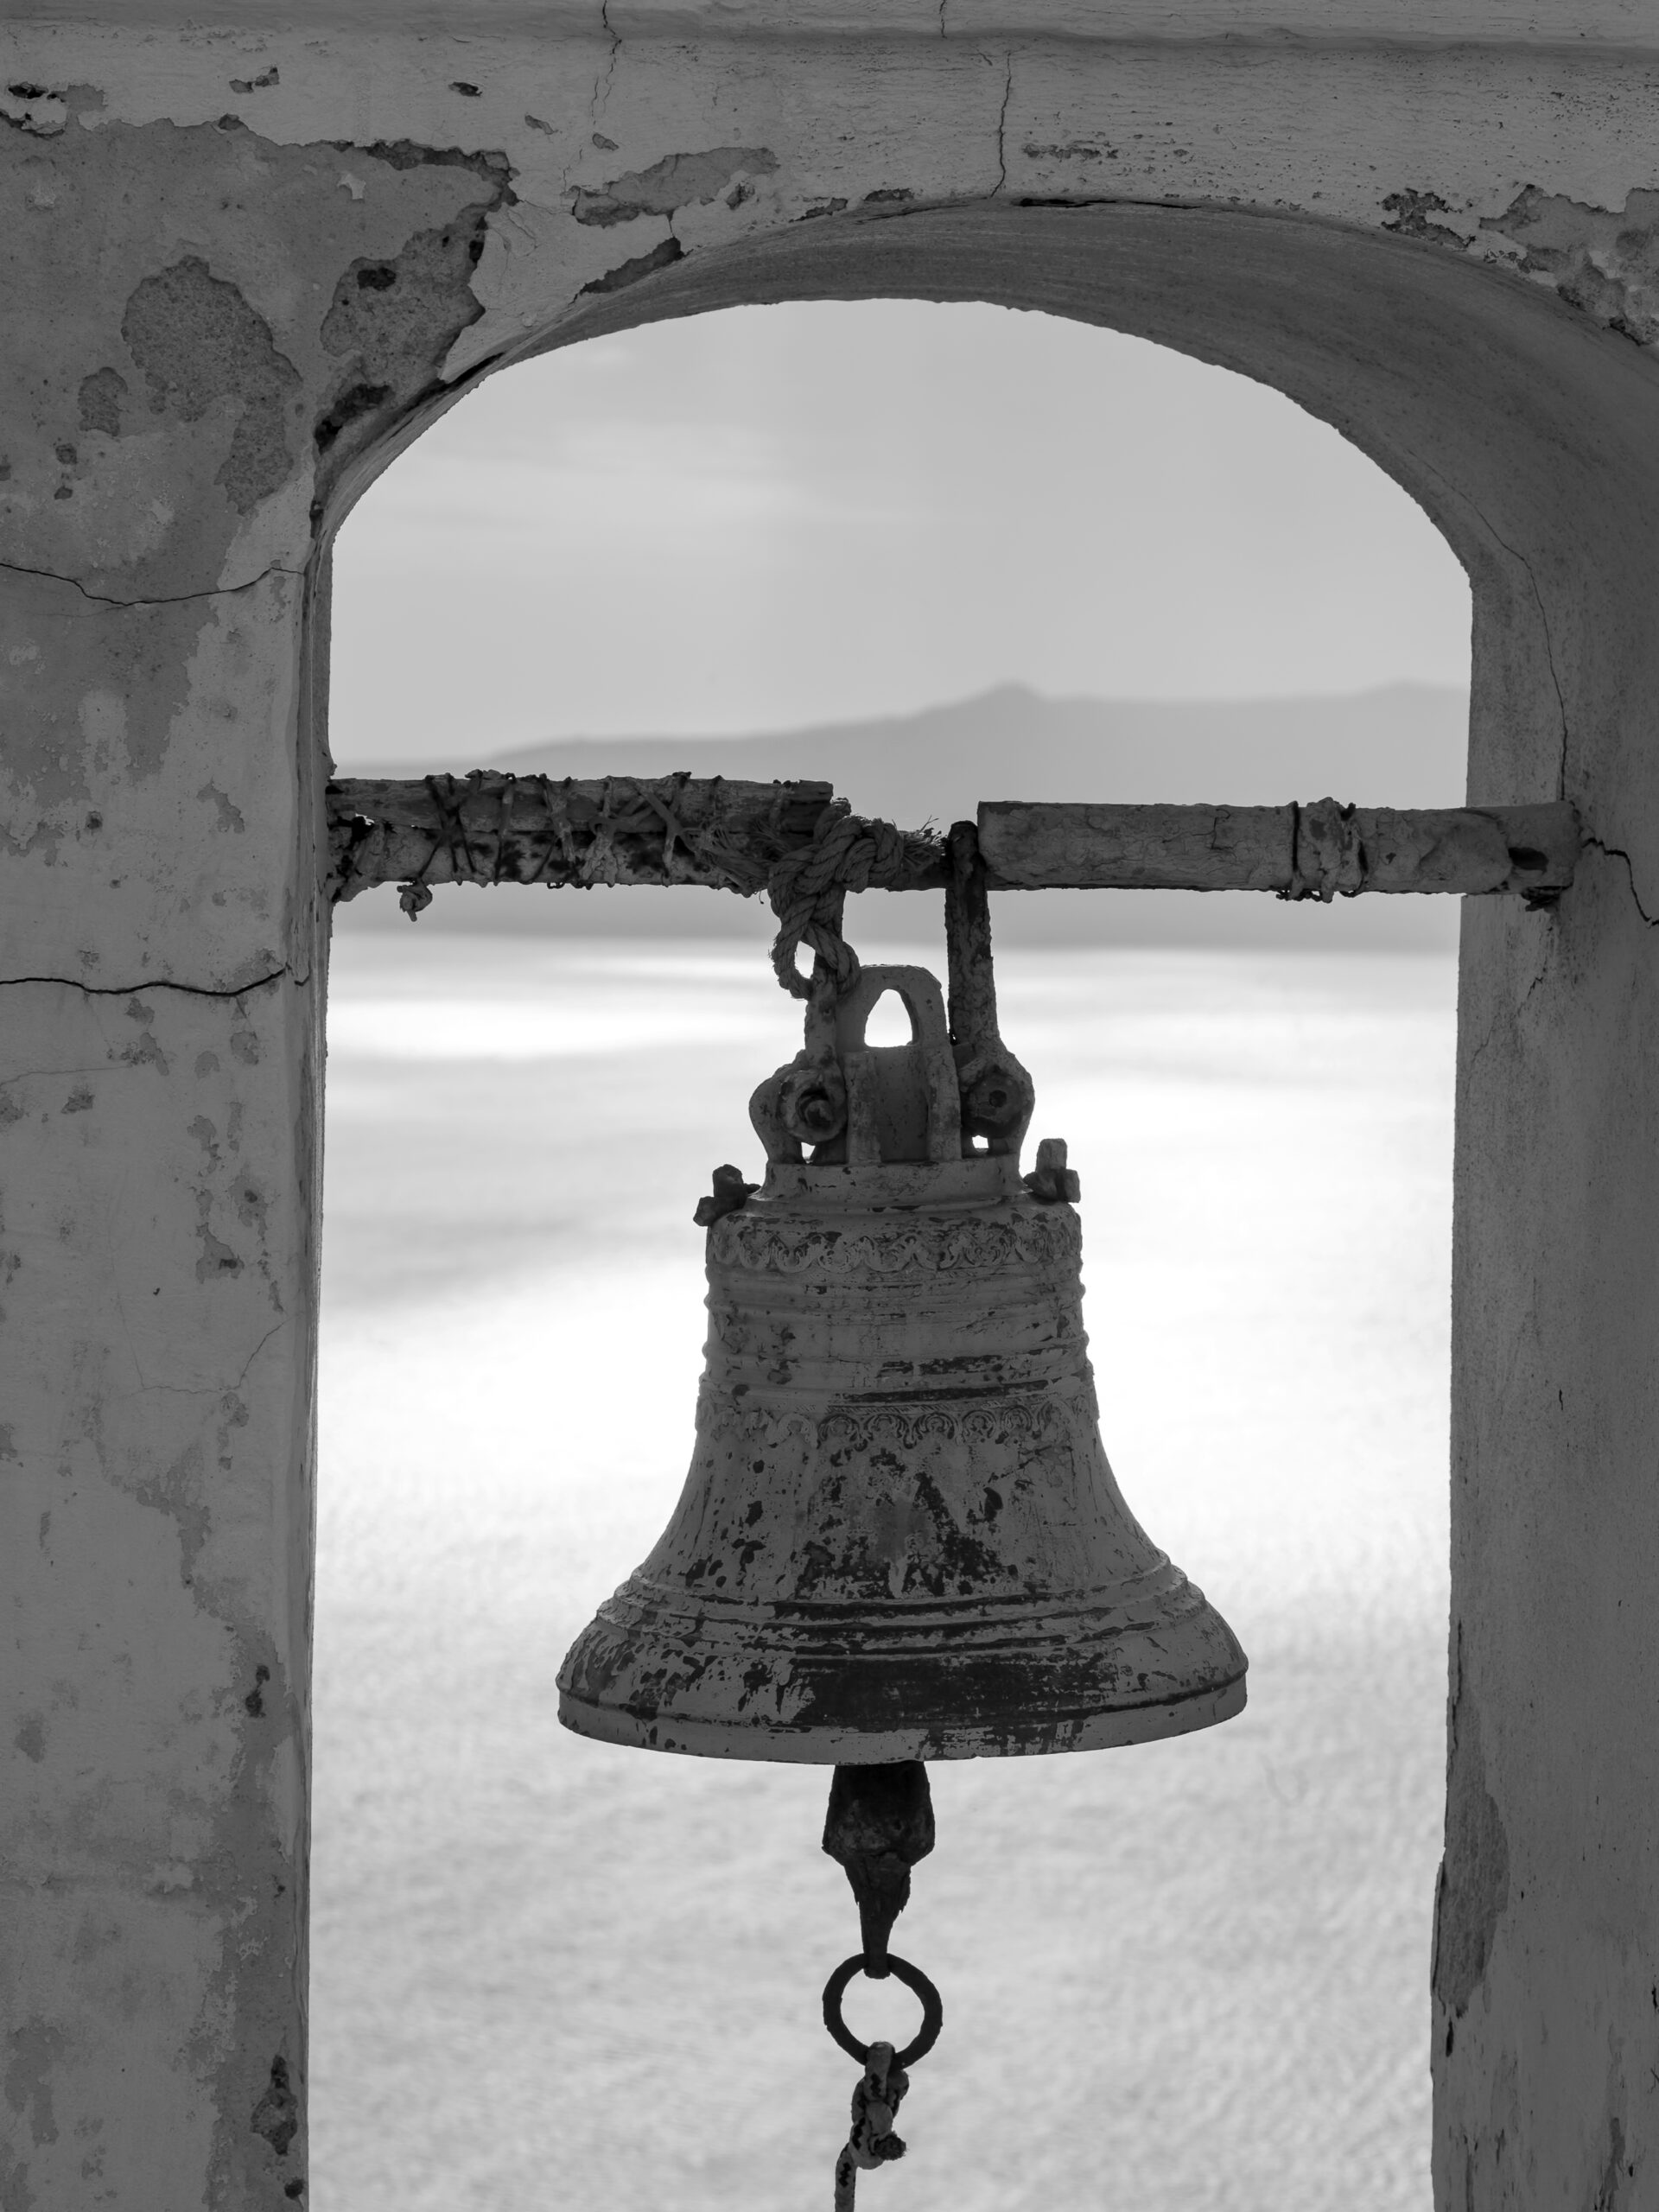 Ancient bell in black and white, overlooking the caldera in Santorini, Greece.